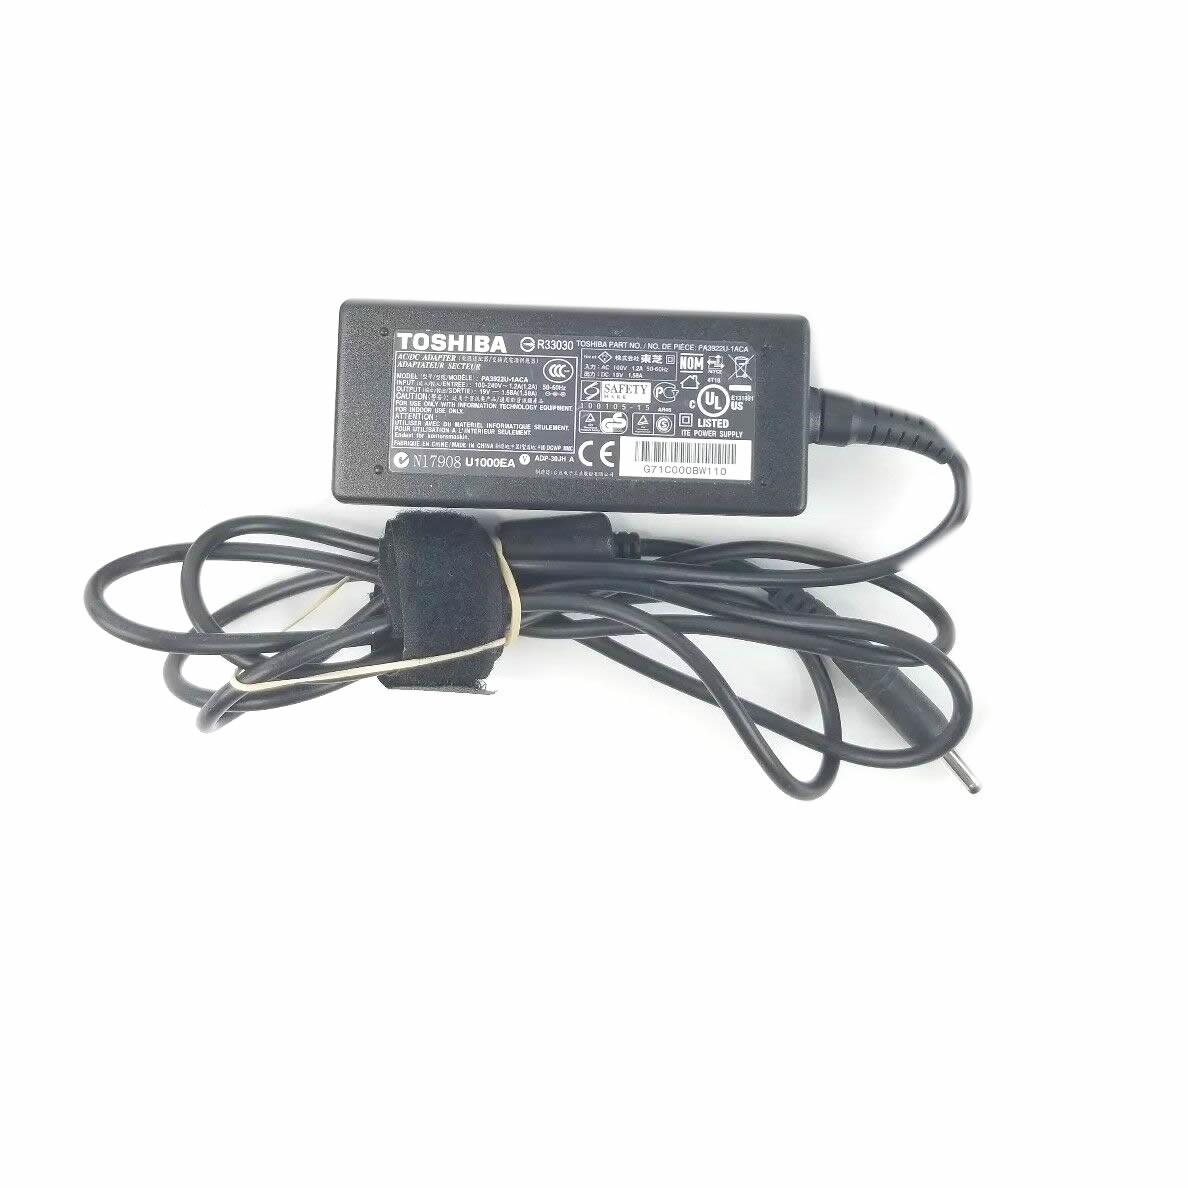 Chargeur Toshiba AD-30JH B,ADP-30JH,ADP-30JH A 19V 1.58A 30W alimentation originale pour Toshiba AT100 AT105-T1016G AT105-T1032G séries